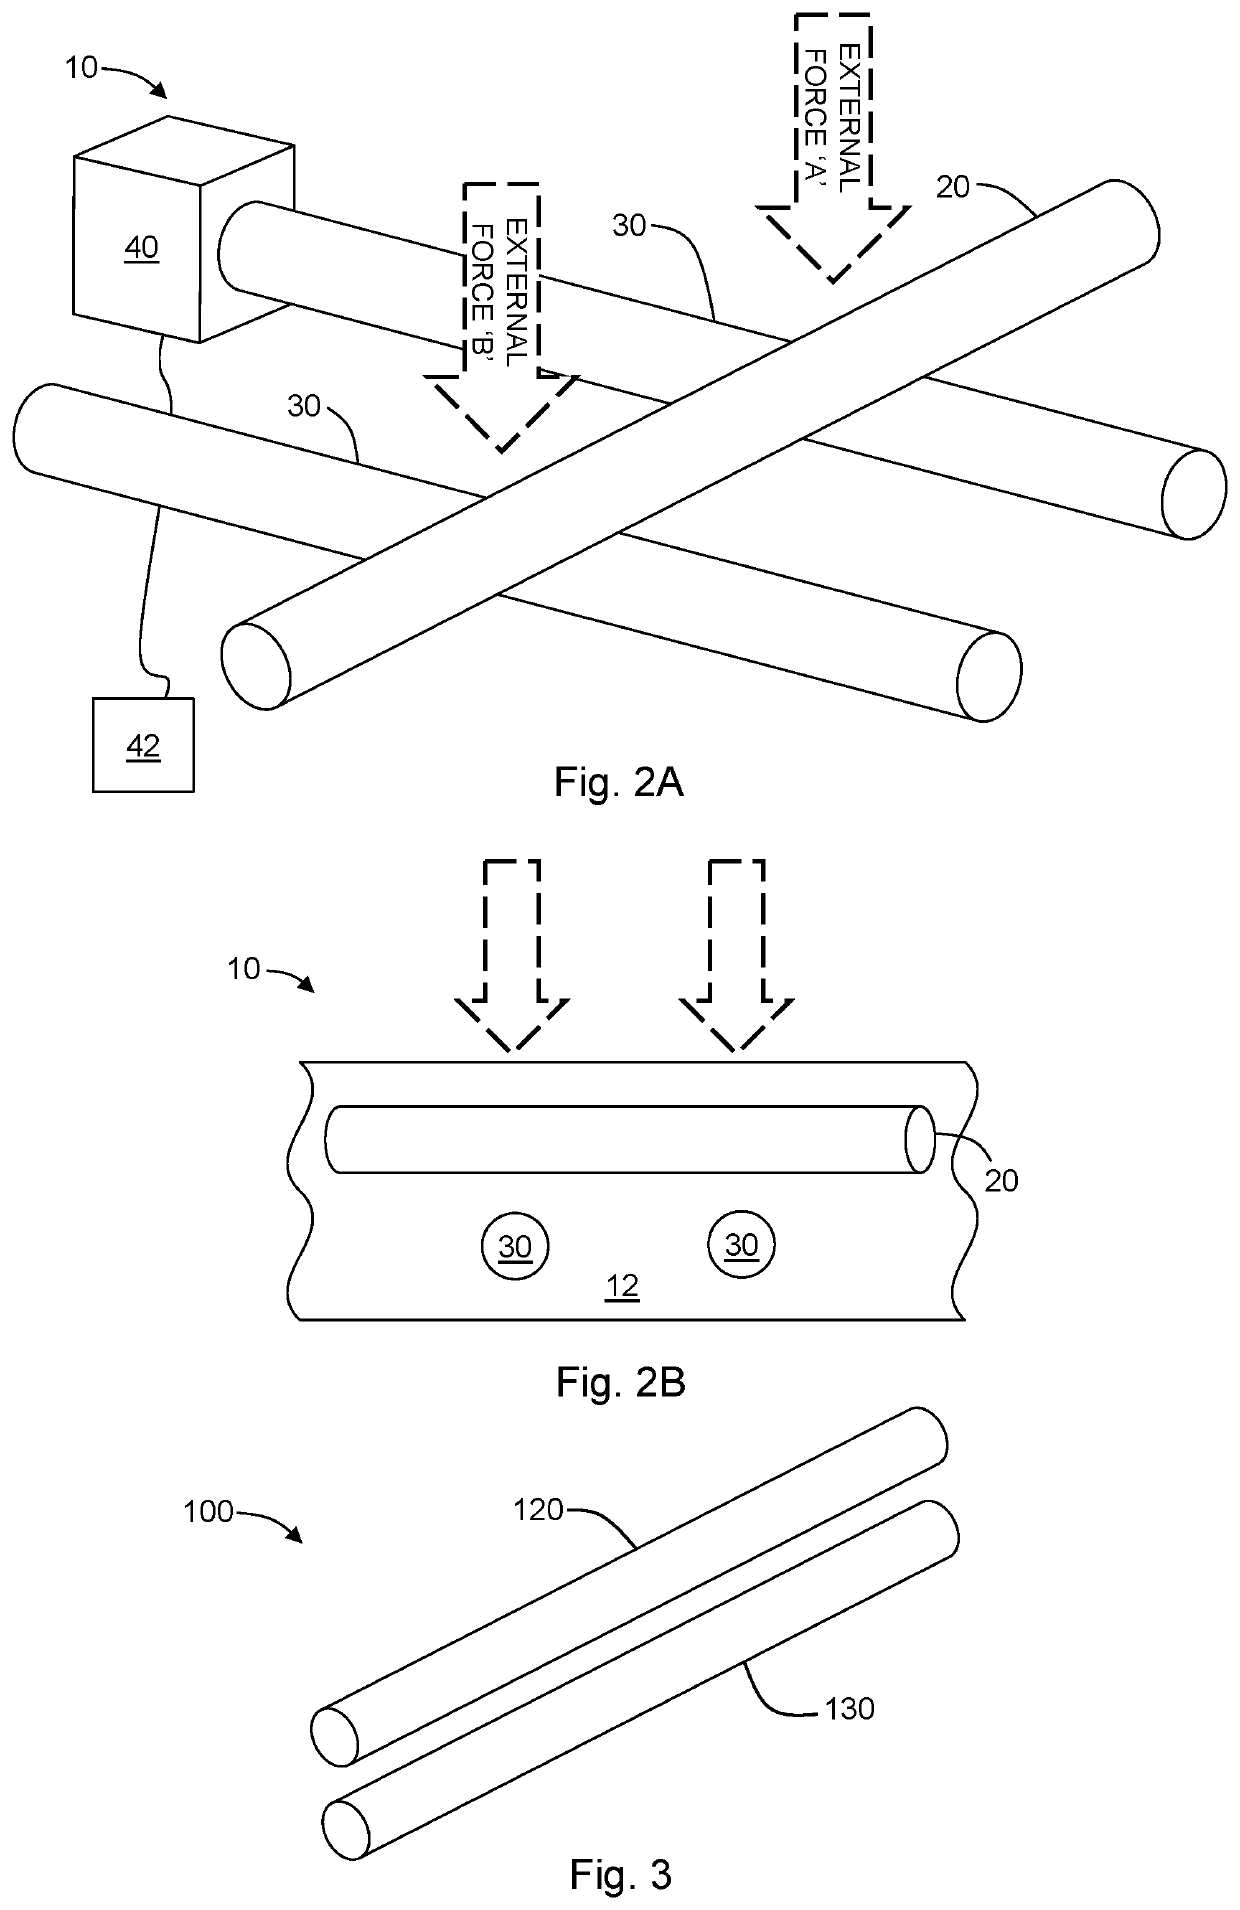 Elastomeric lightguide coupling for continuous position localization in 1,2, and 3D